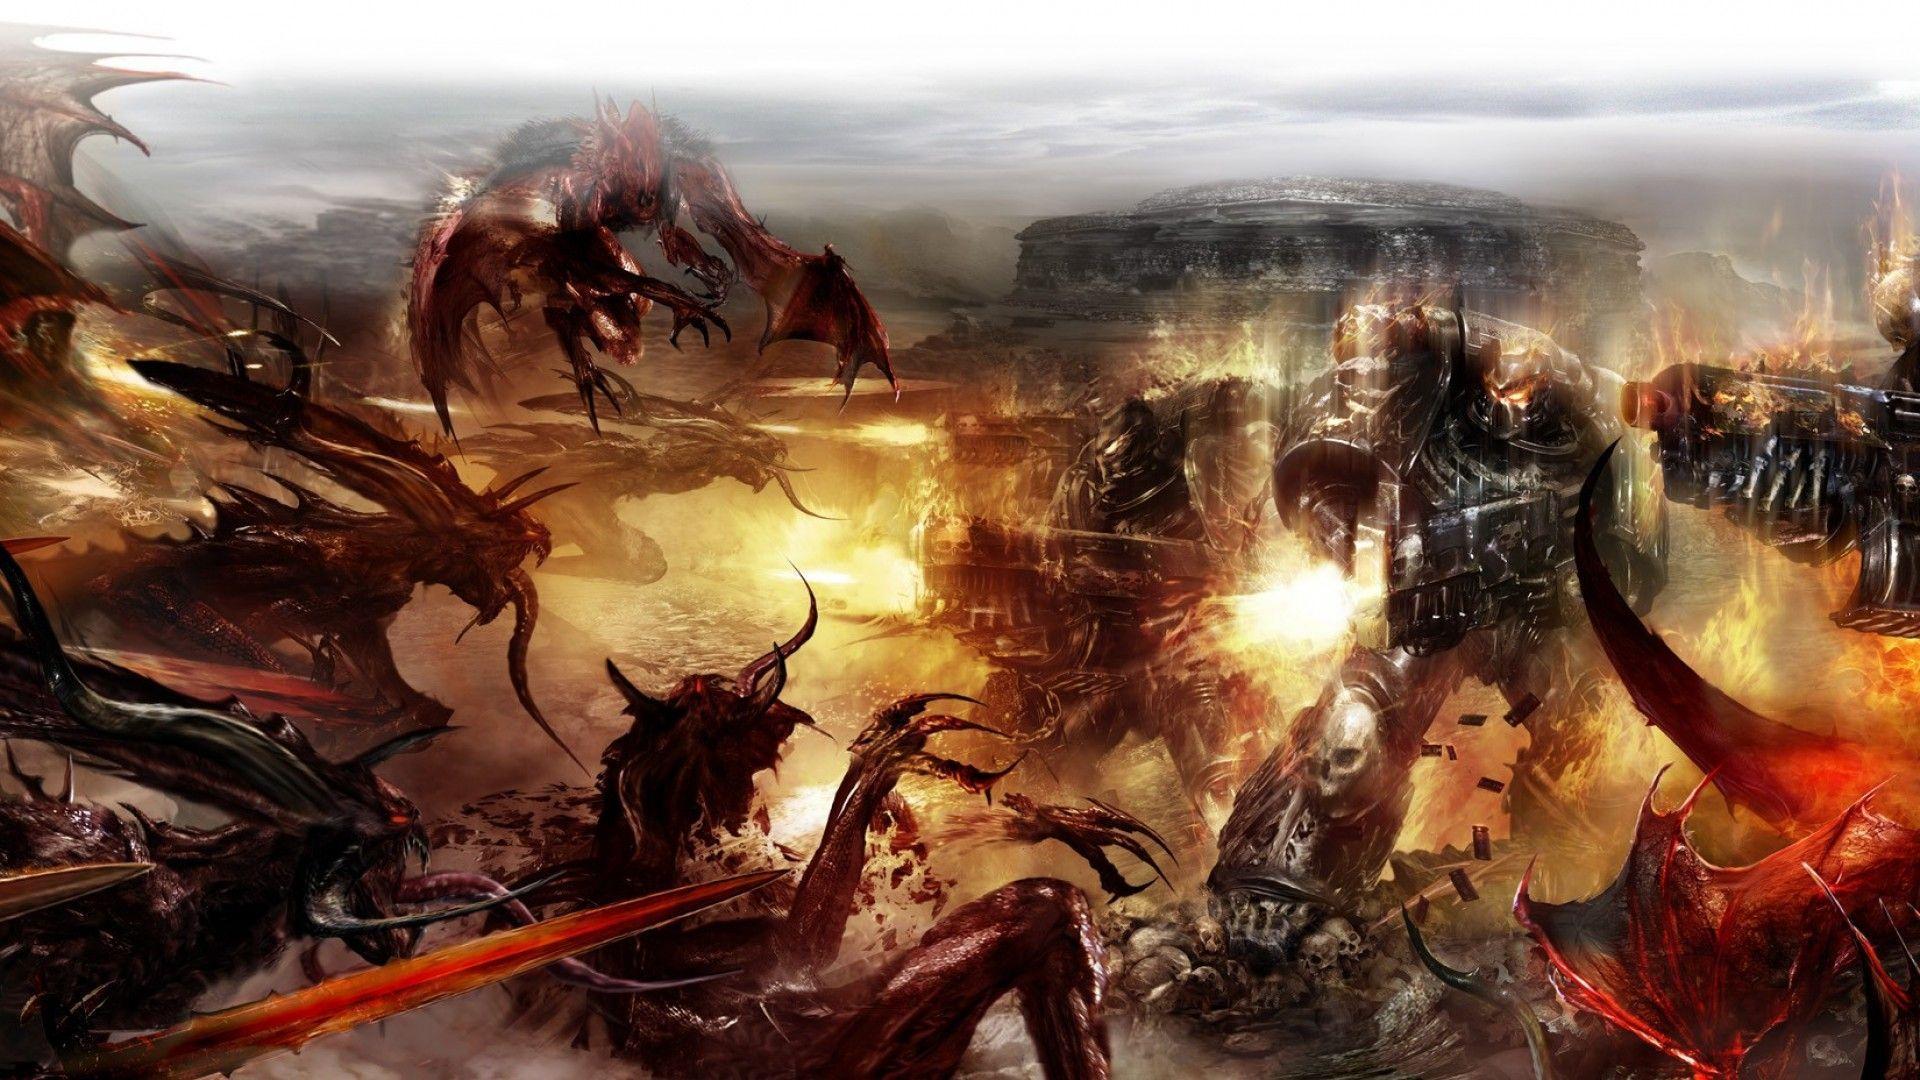 image For > Warhammer 40k Chaos Space Marines Wallpaper